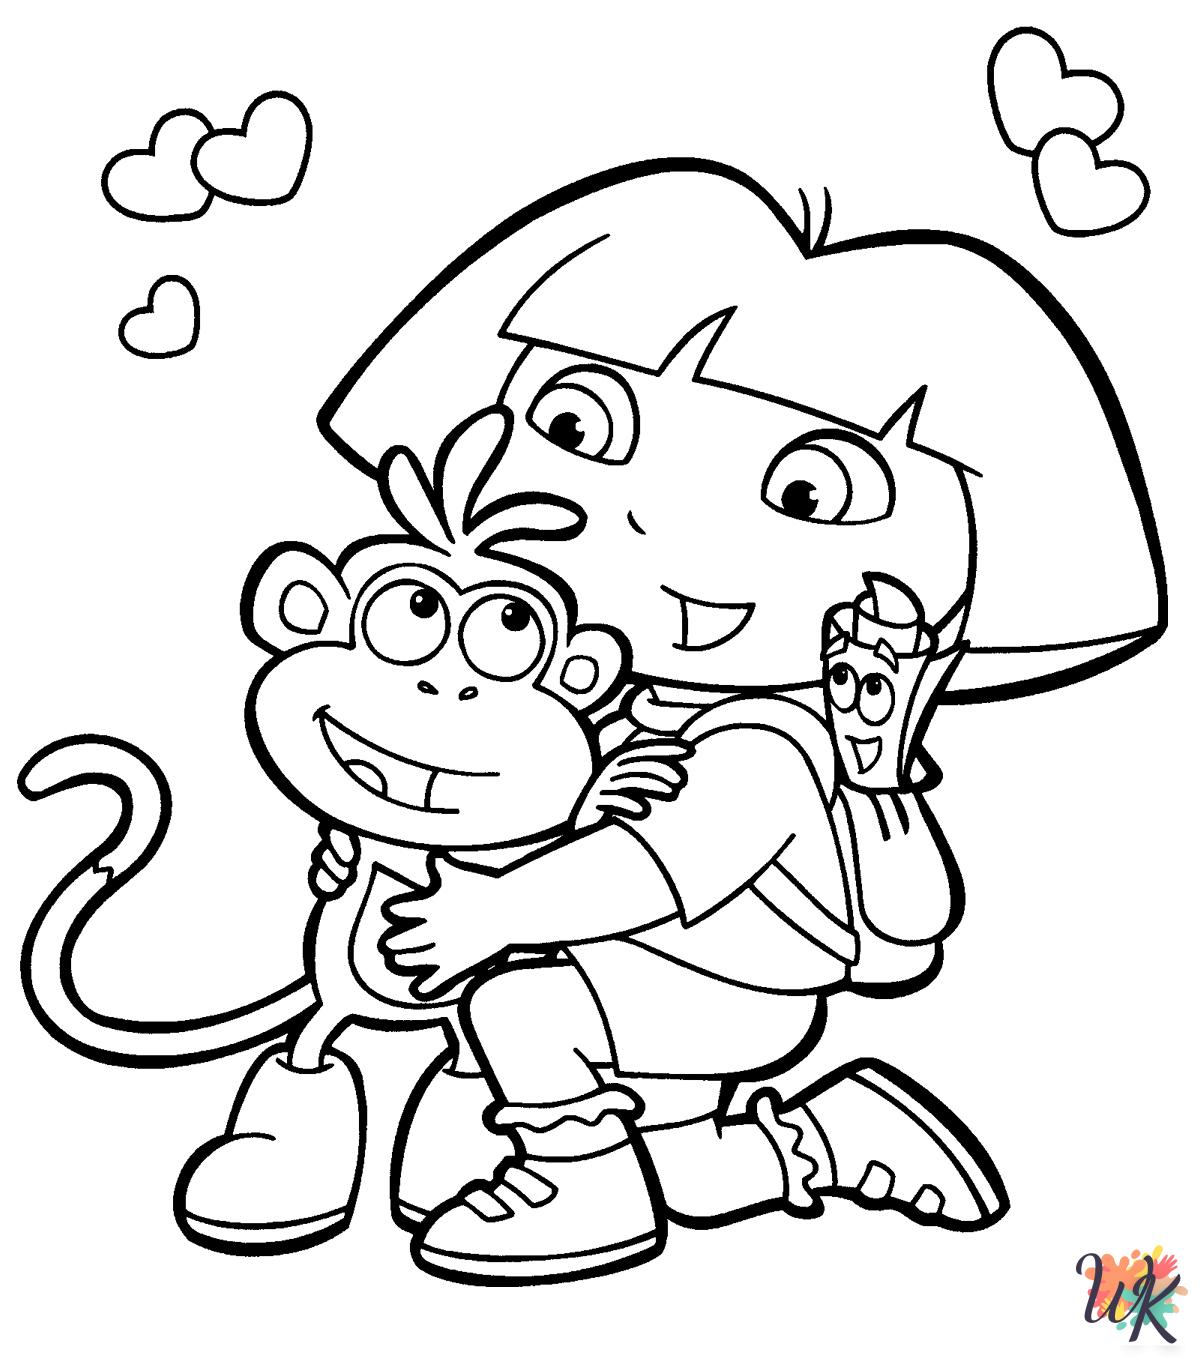 Dora Christmas coloring pages free printable